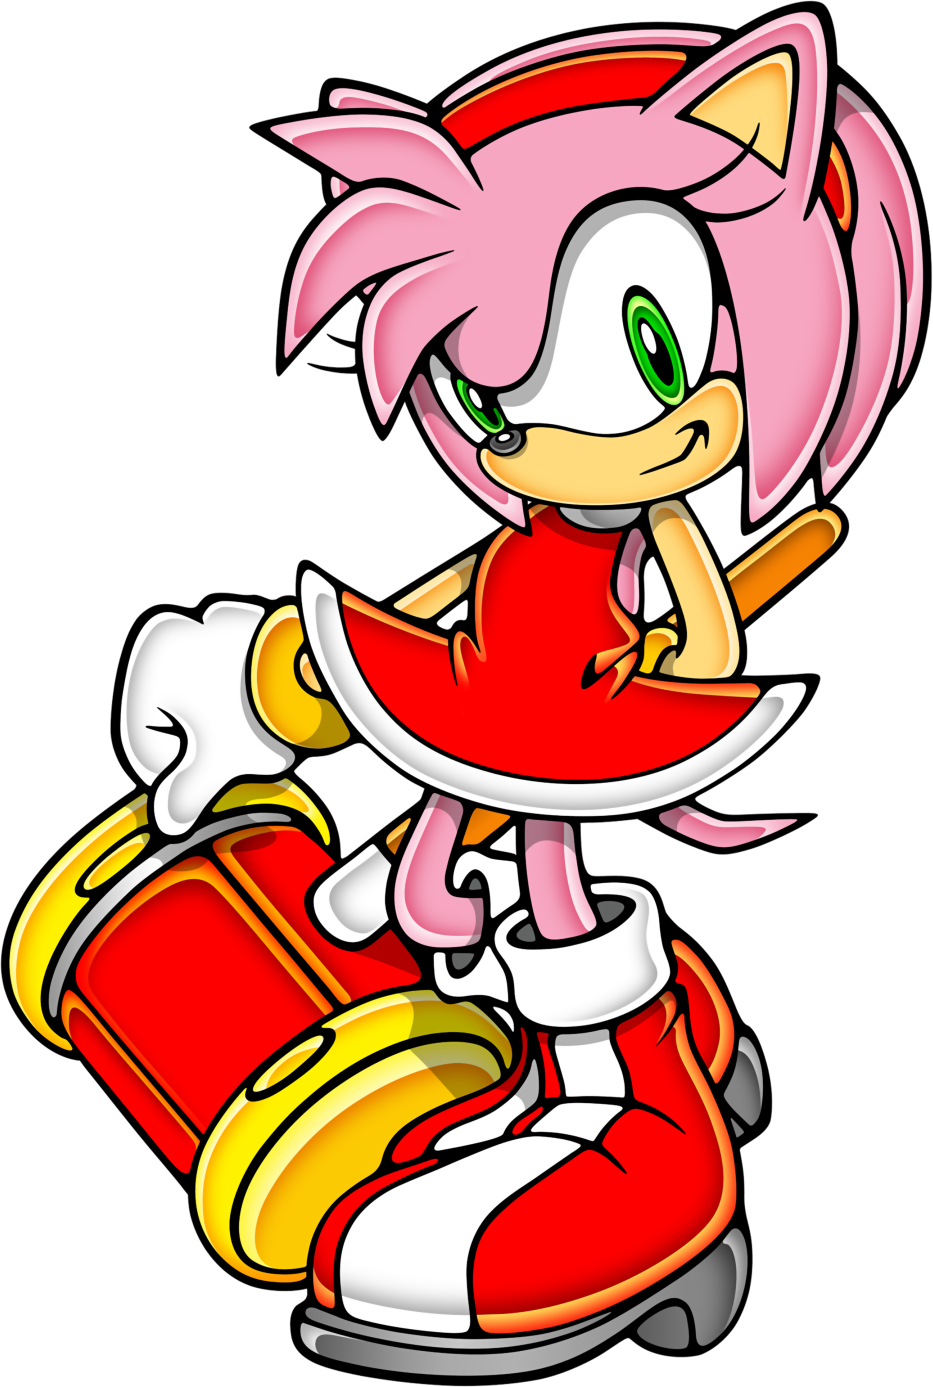 Amy Rose, Heroes Wiki